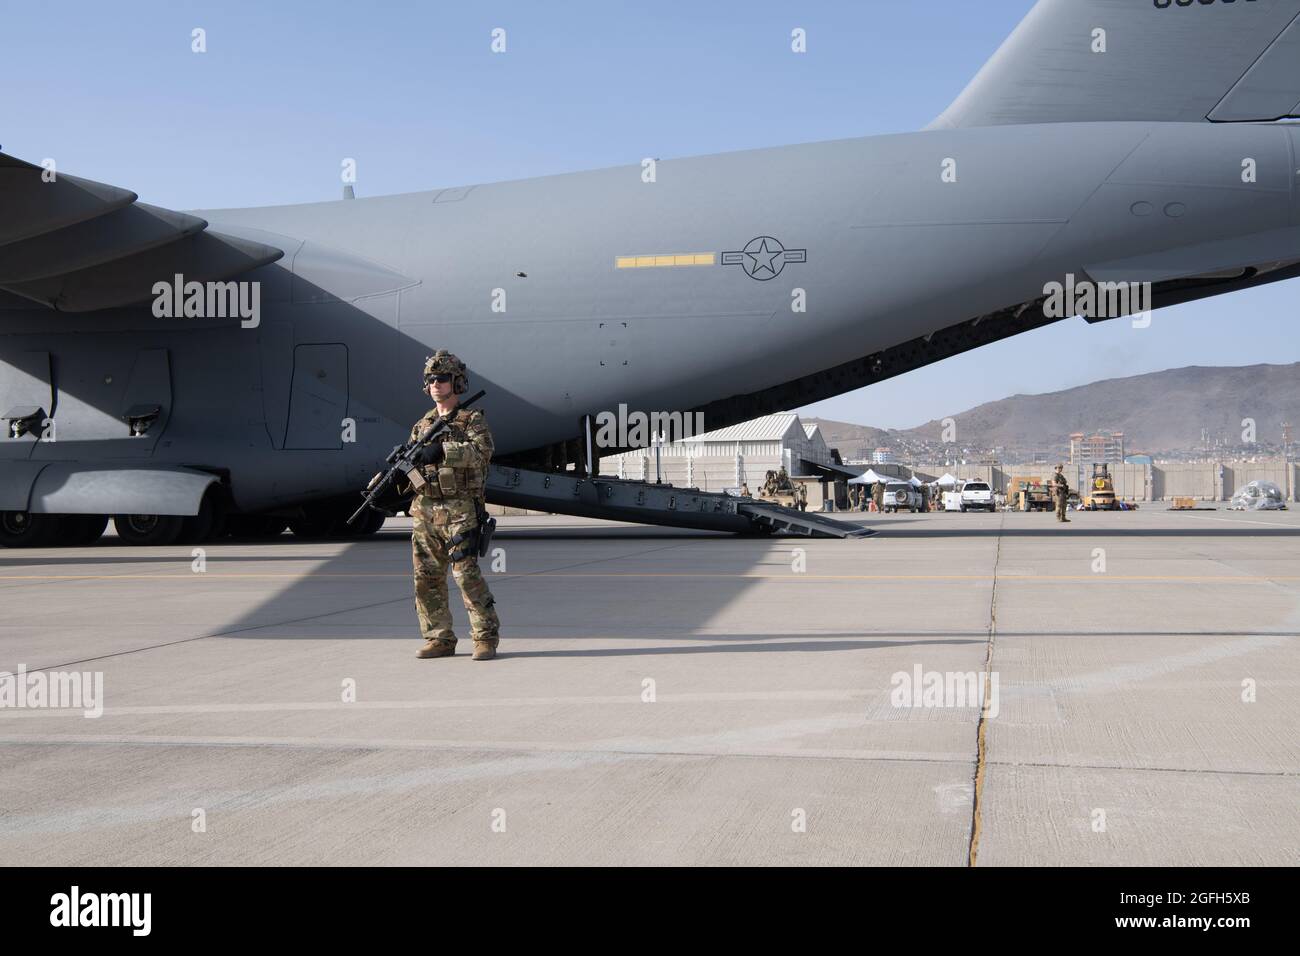 A U.S. Air Force security forces raven, assigned to the 816th Expeditionary Airlift Squadron, maintain a security cordon around a U.S. Air Force C-17 Globemaster III aircraft in support of the Afghanistan evacuation at Hamid Karzai International Airport (HKIA), Afghanistan, Aug. 24, 2021. (U.S. Air Force photo by Master Sgt. Donald R. Allen) Stock Photo